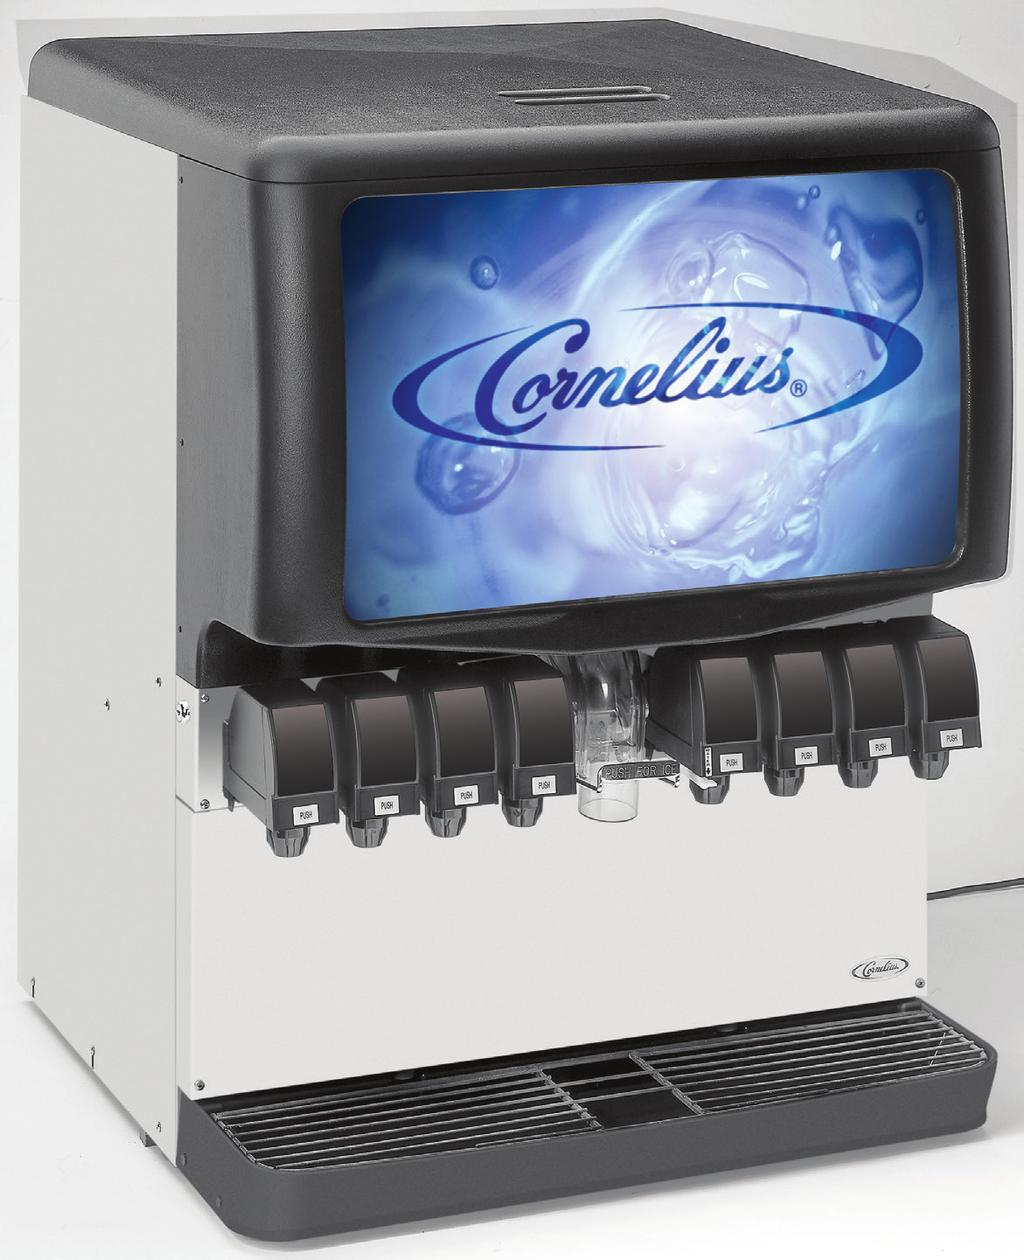 ENDURO 200 POST-MIX ICE DRINK DISPENSER FEATURES Large ice capactiy- 200 lb.